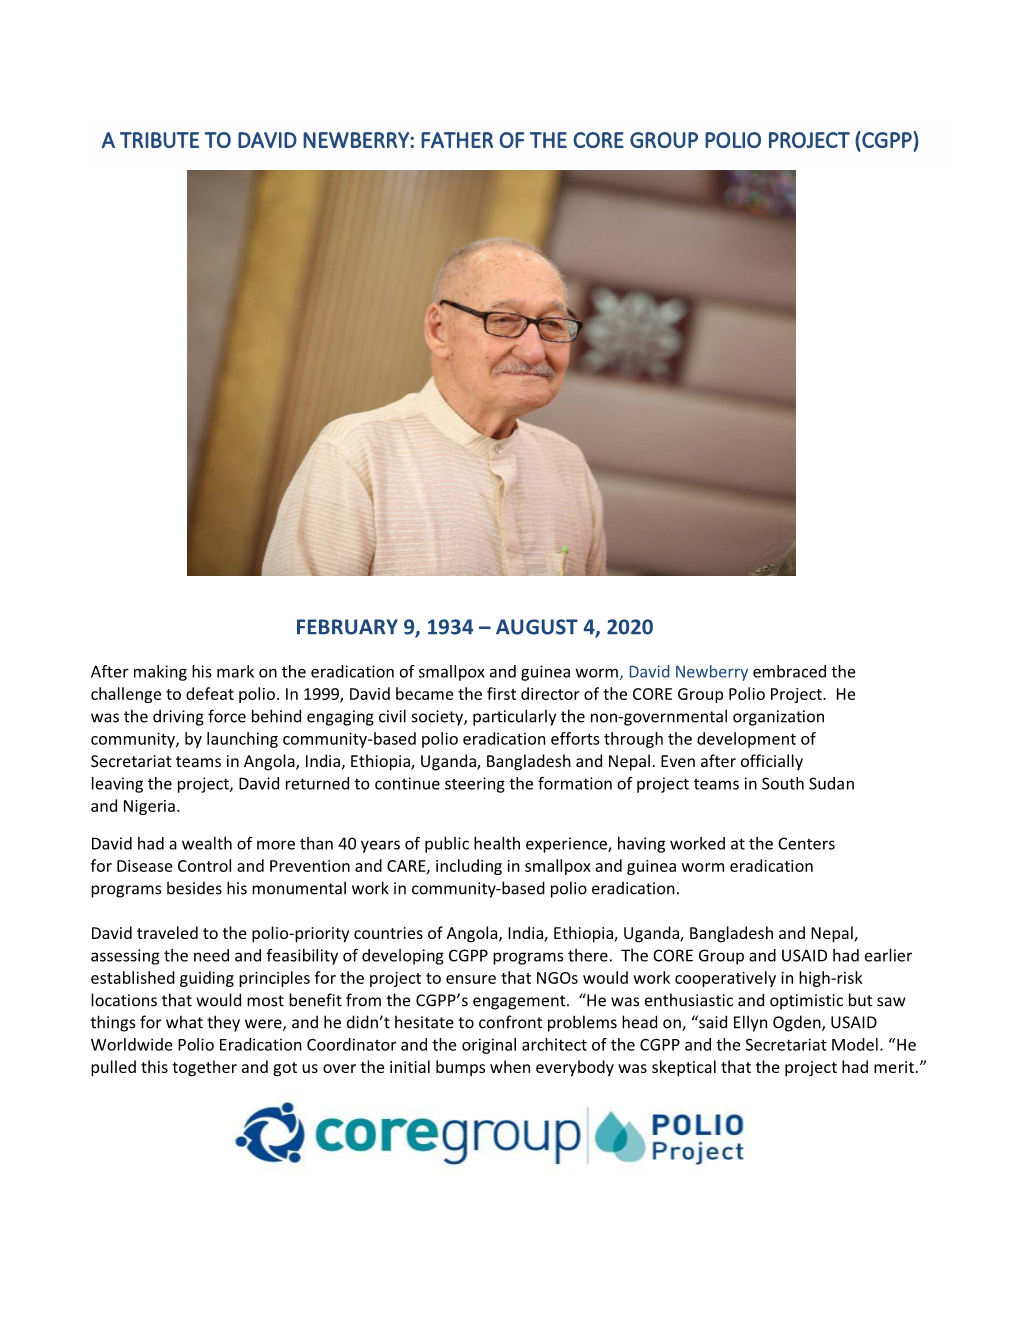 A Tribute to David Newberry: Father of the Core Group Polio Project (Cgpp)